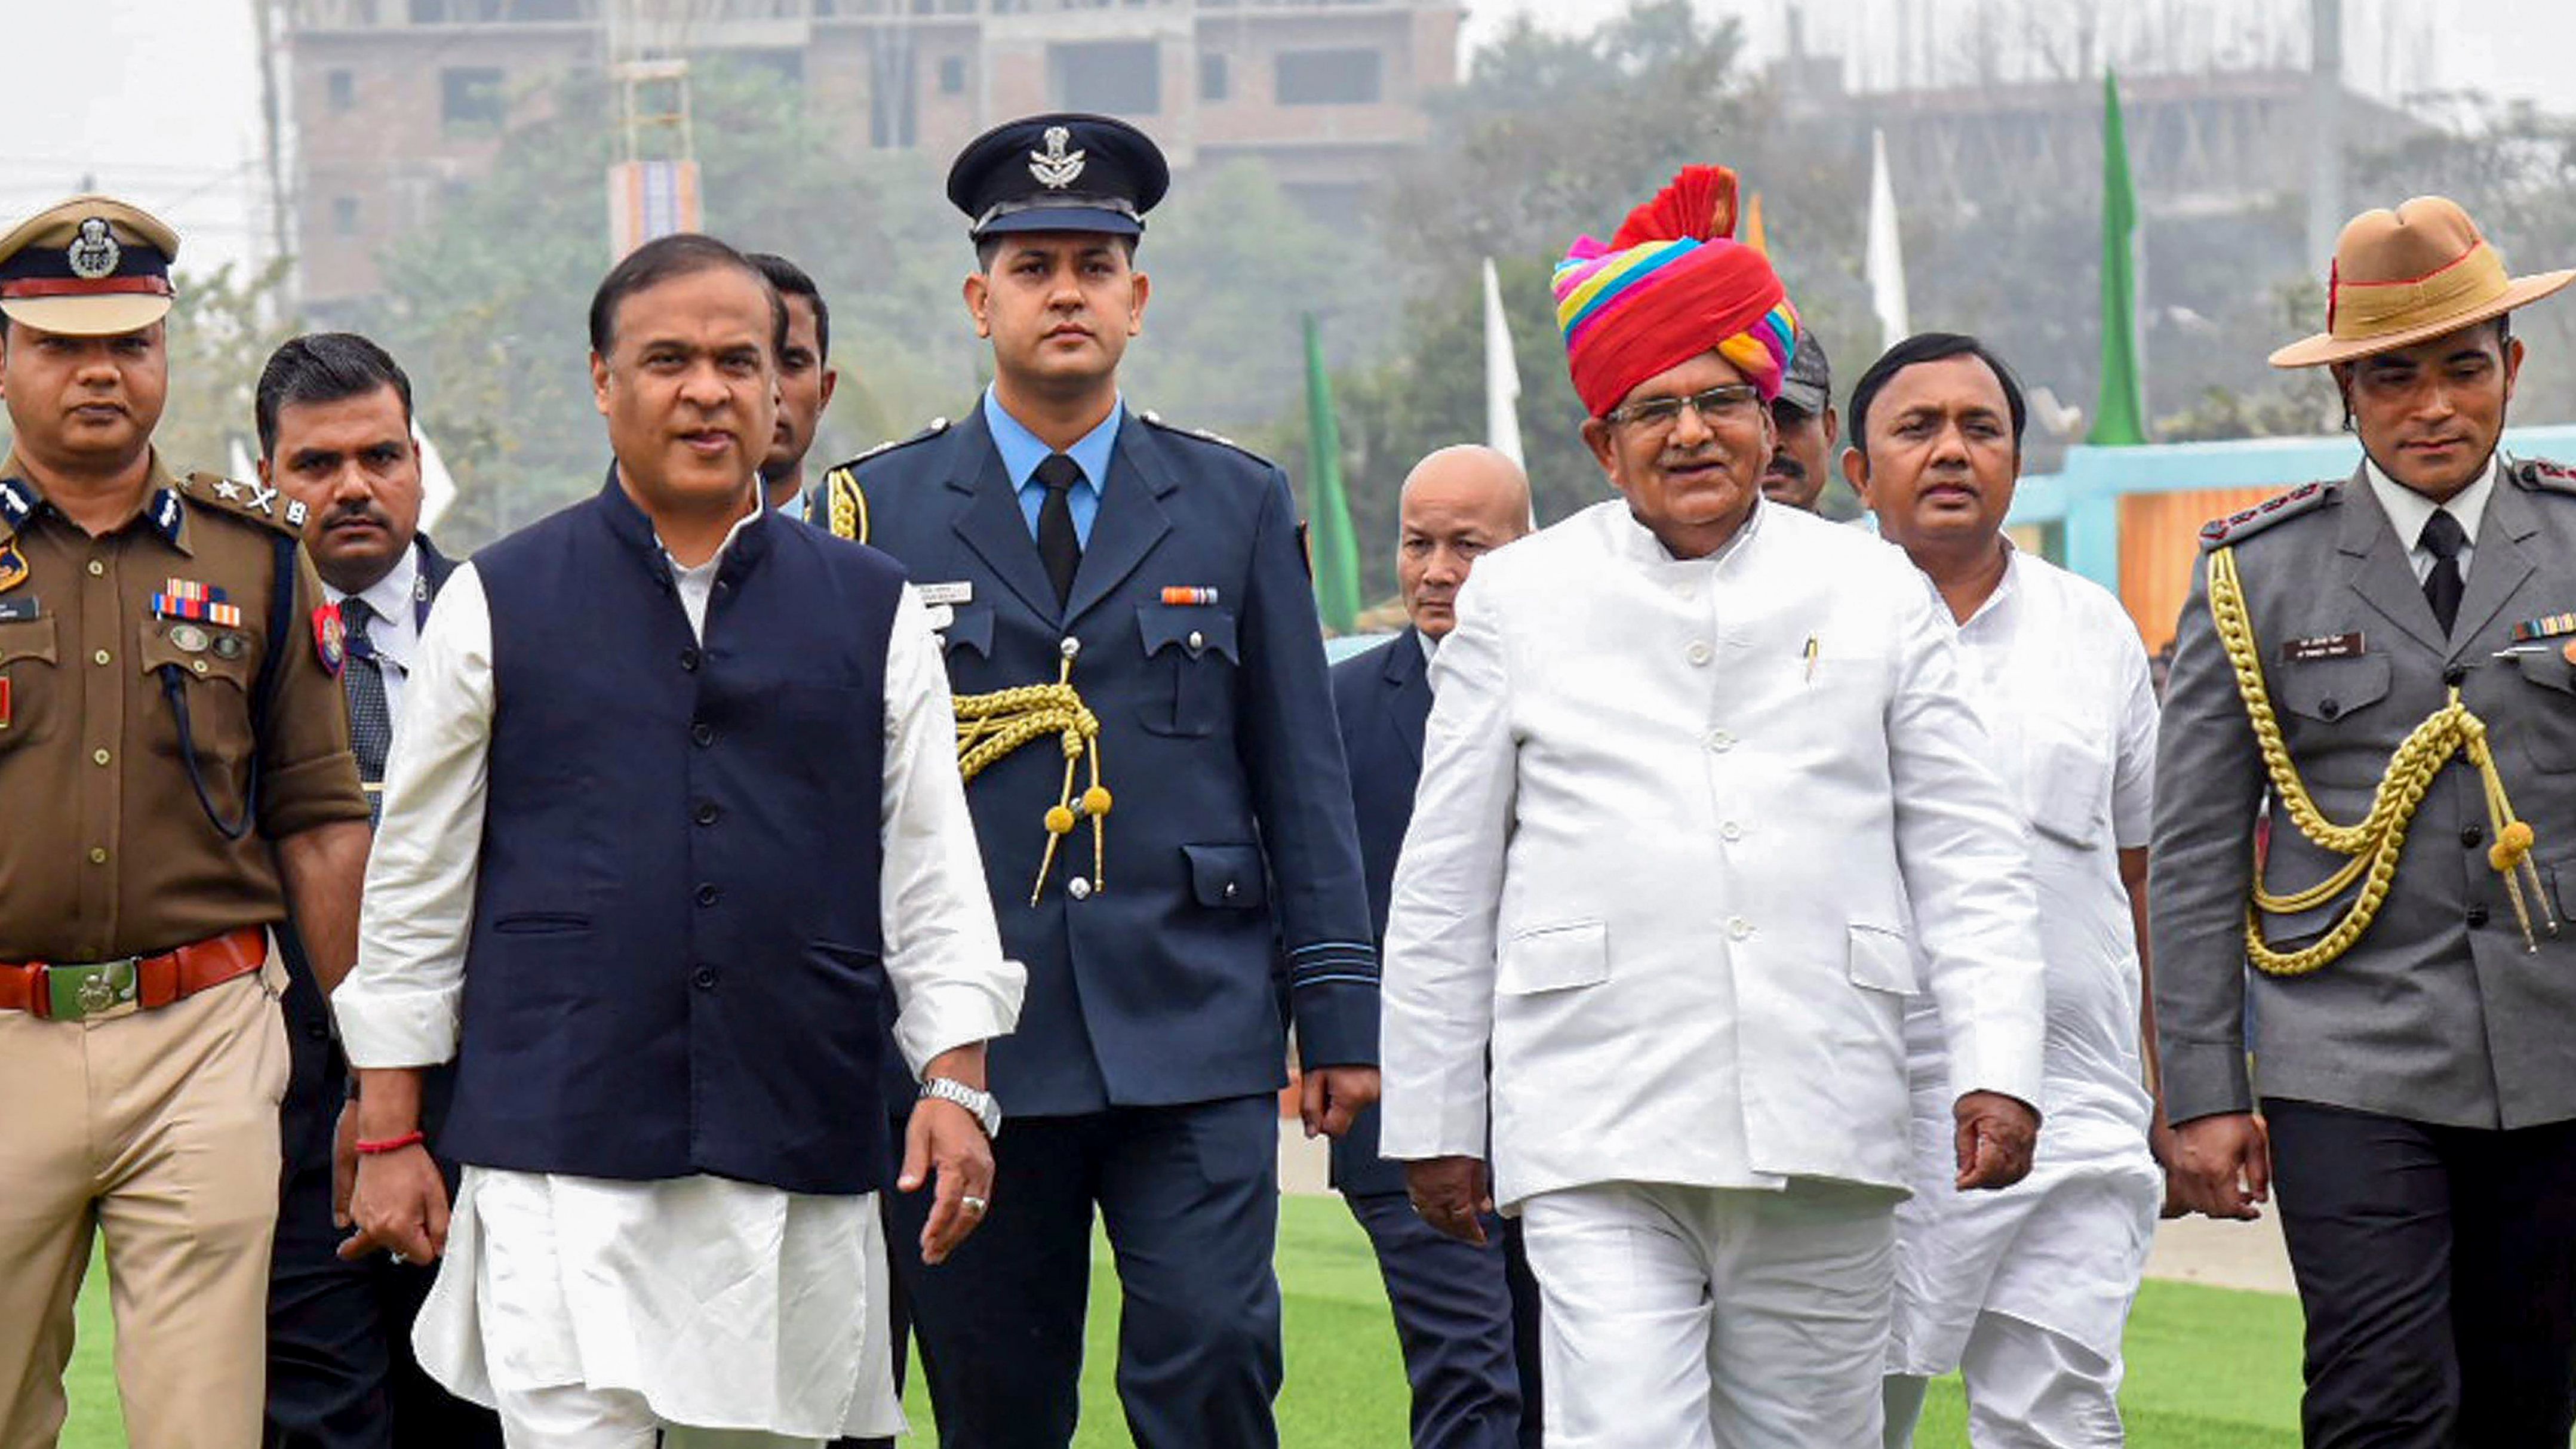 Newly sworn-in Assam Governor Gulab Chand Kataria with Chief Minister Himanta Biswa Sarma after the oath ceremony in Guwahati. Credit: PTI Photo